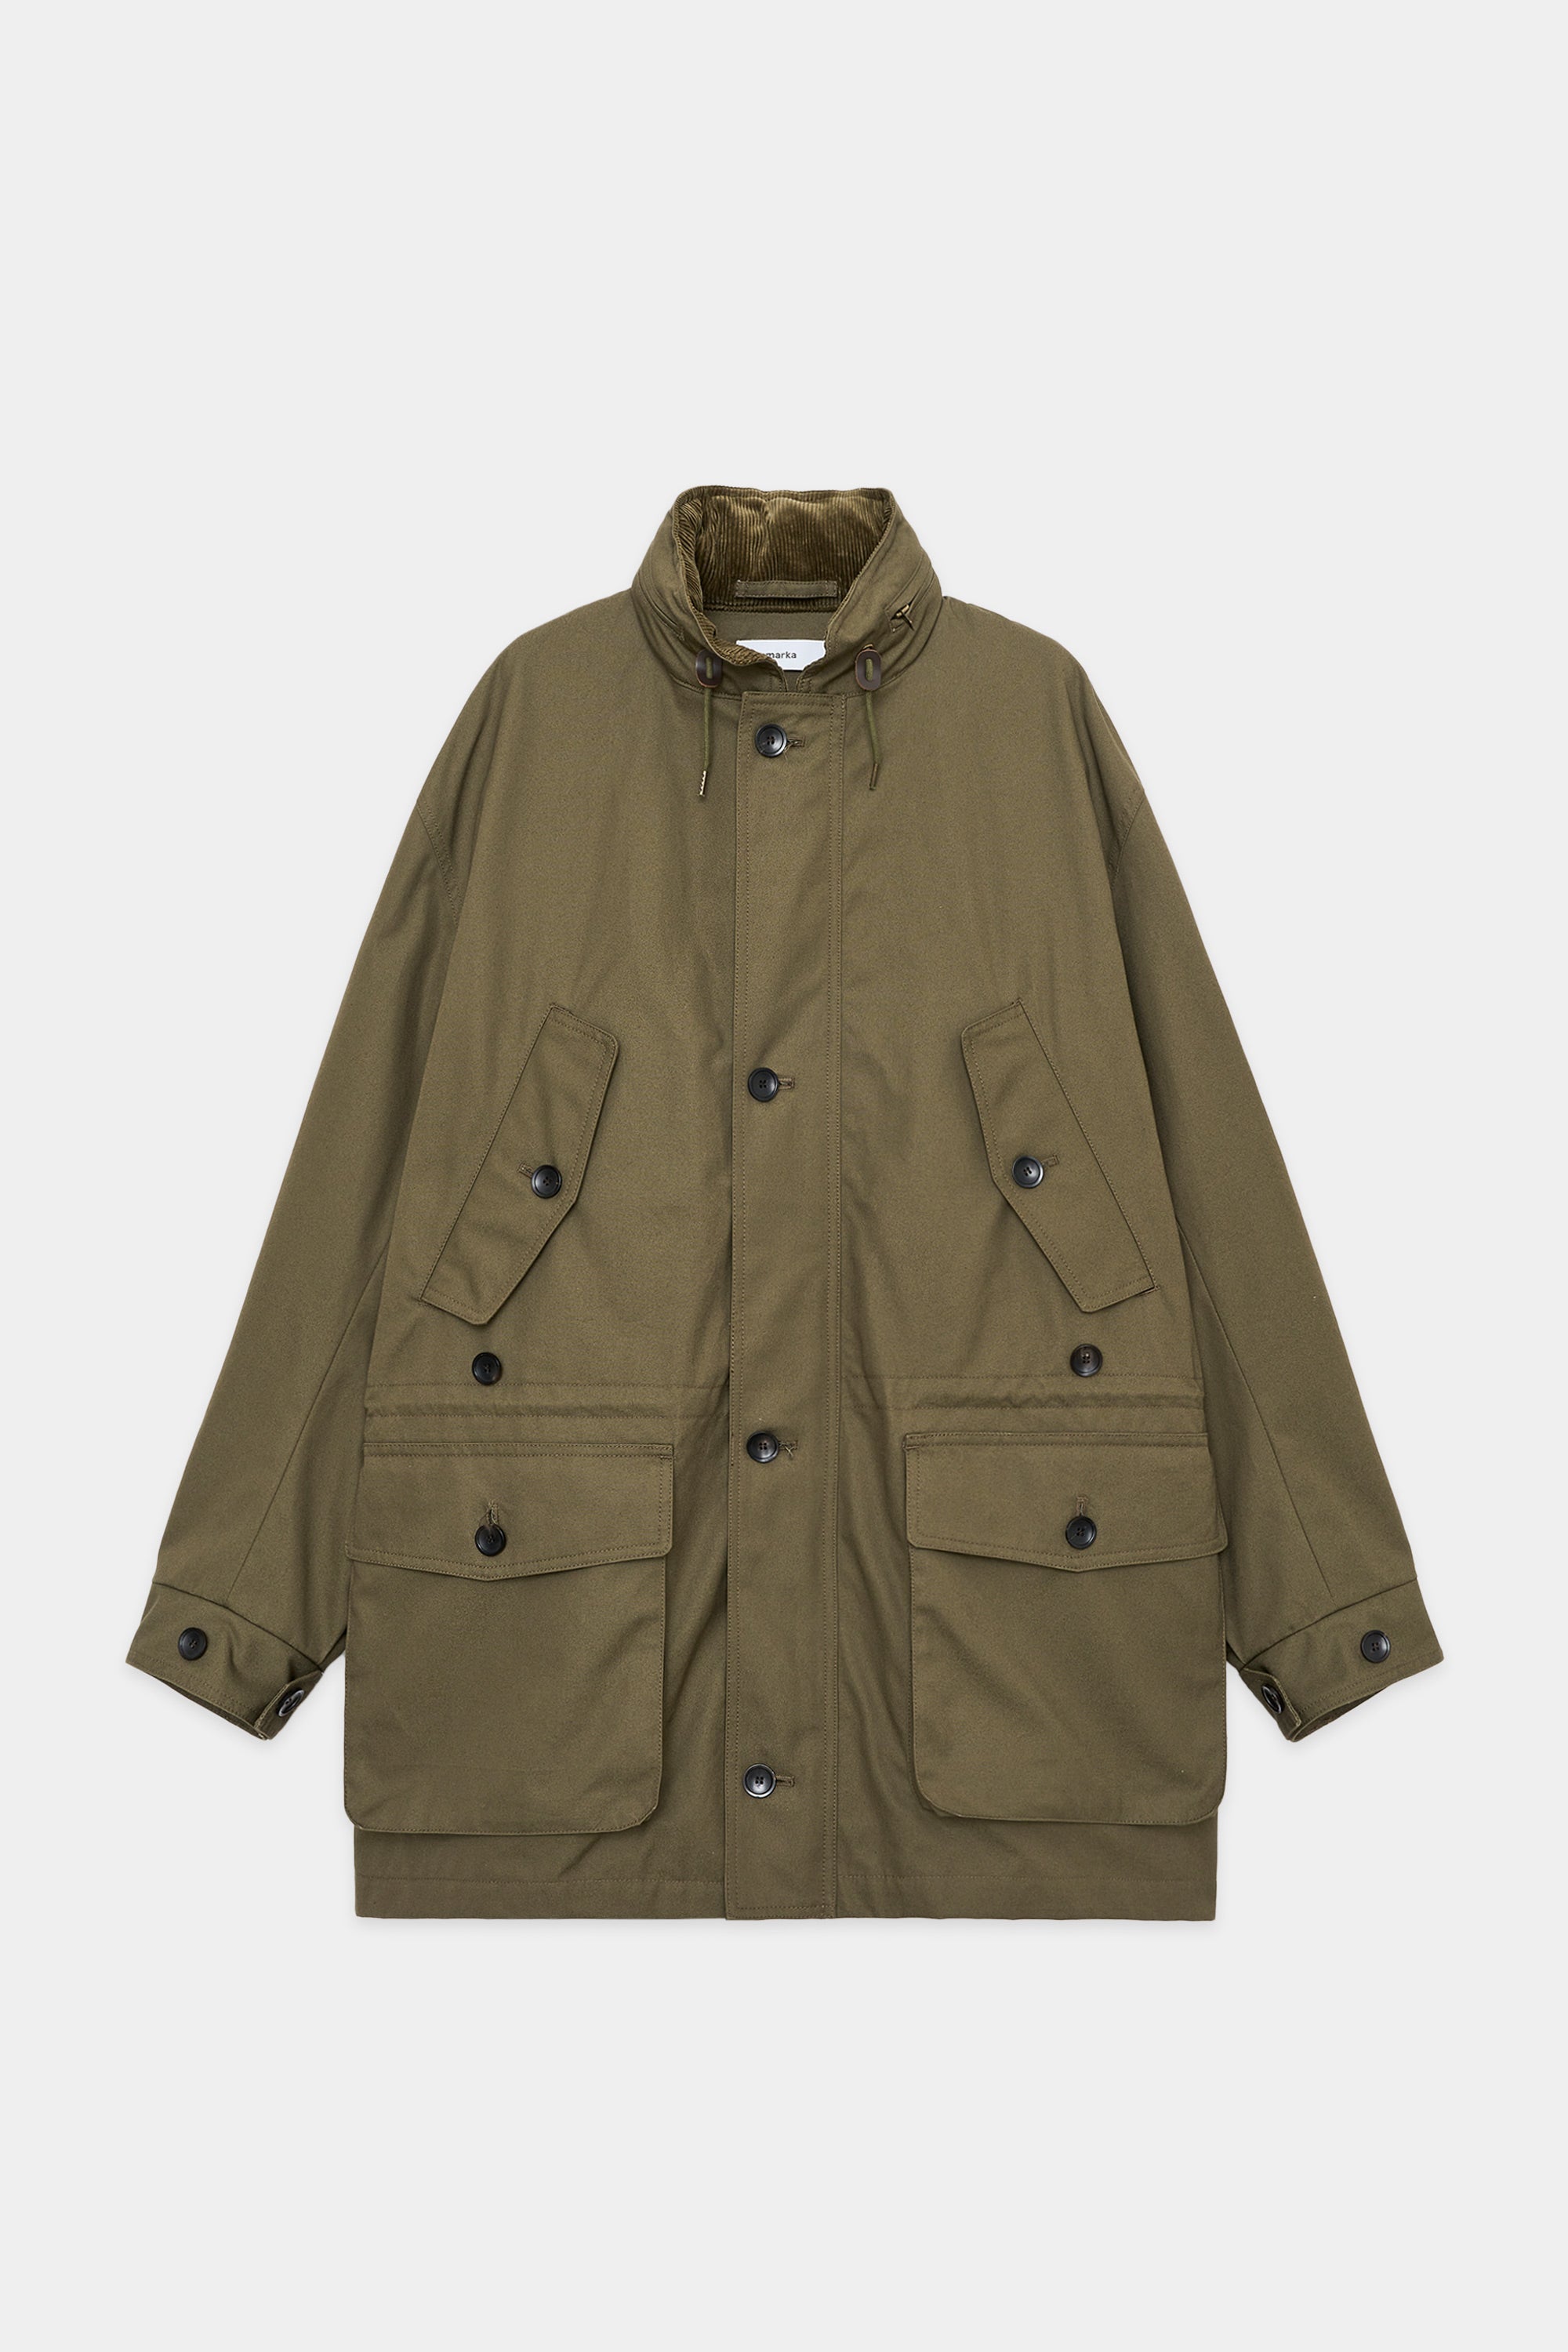 ORGANIC COTTON WEATHER CLOTH OUTDOORMAN JACKET, Olive – MARKAWARE